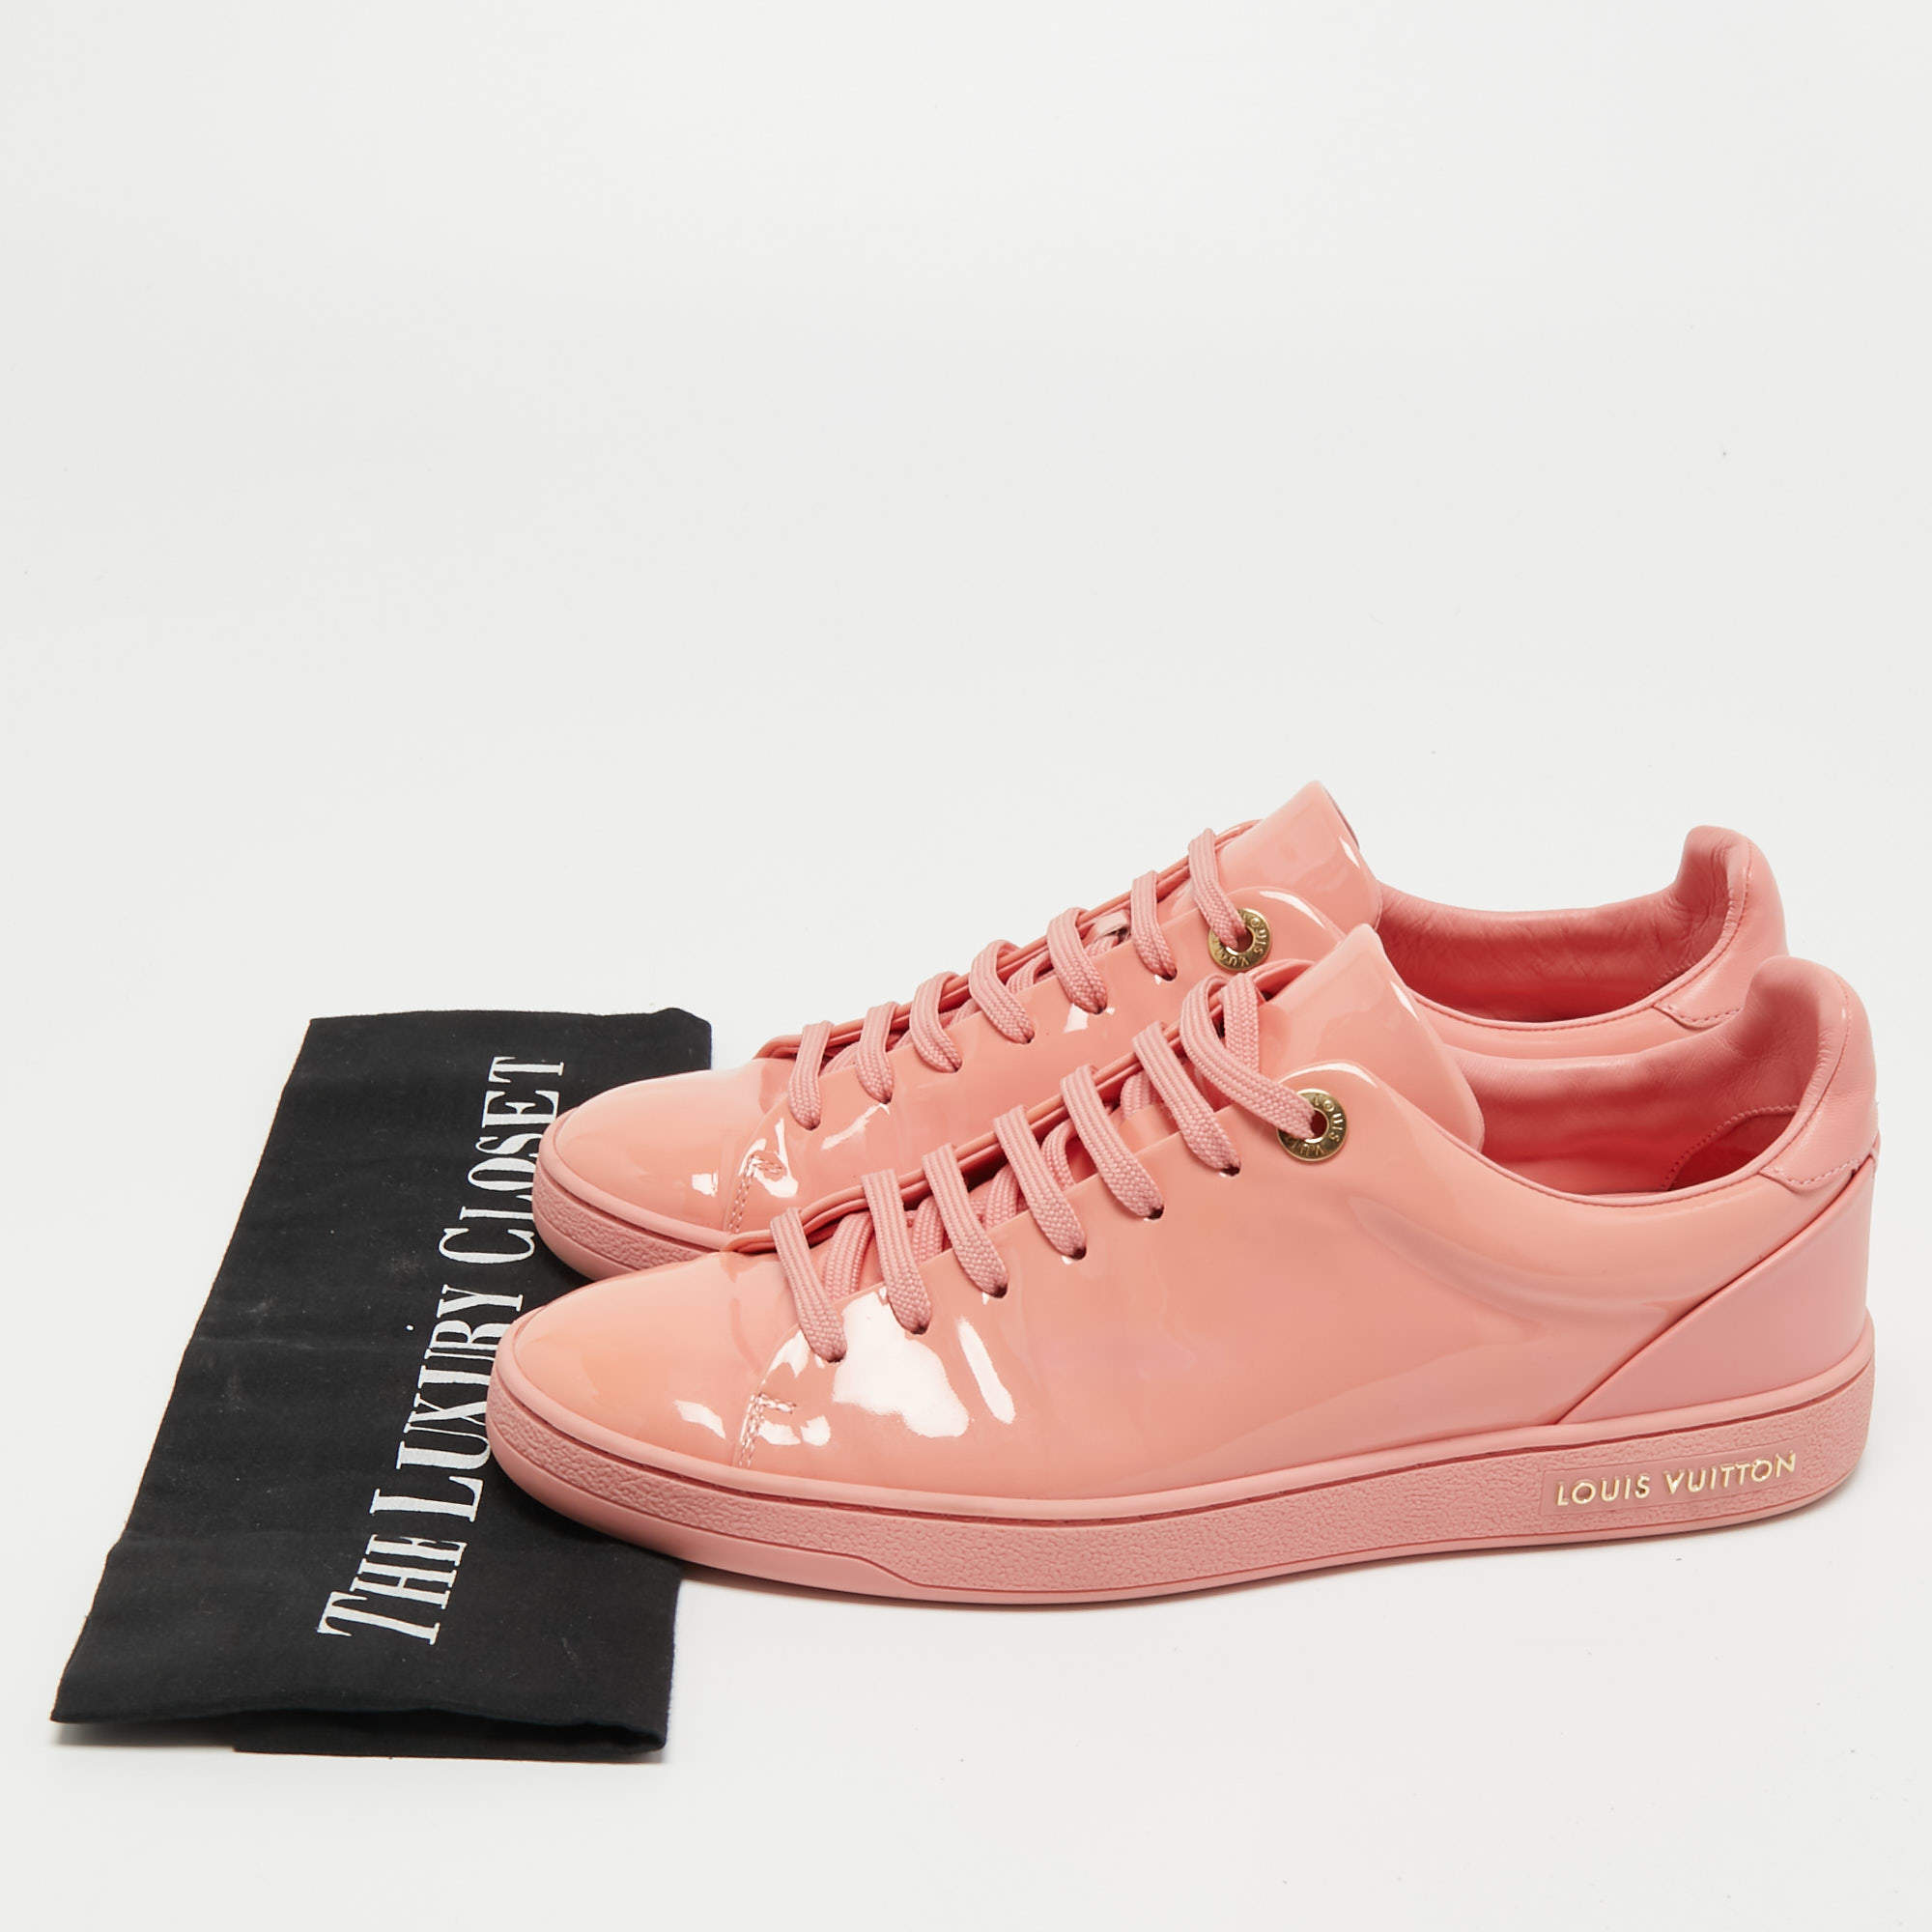 Louis Vuitton Pink Patent Leather Frontrow Sneakers Size 37 Louis